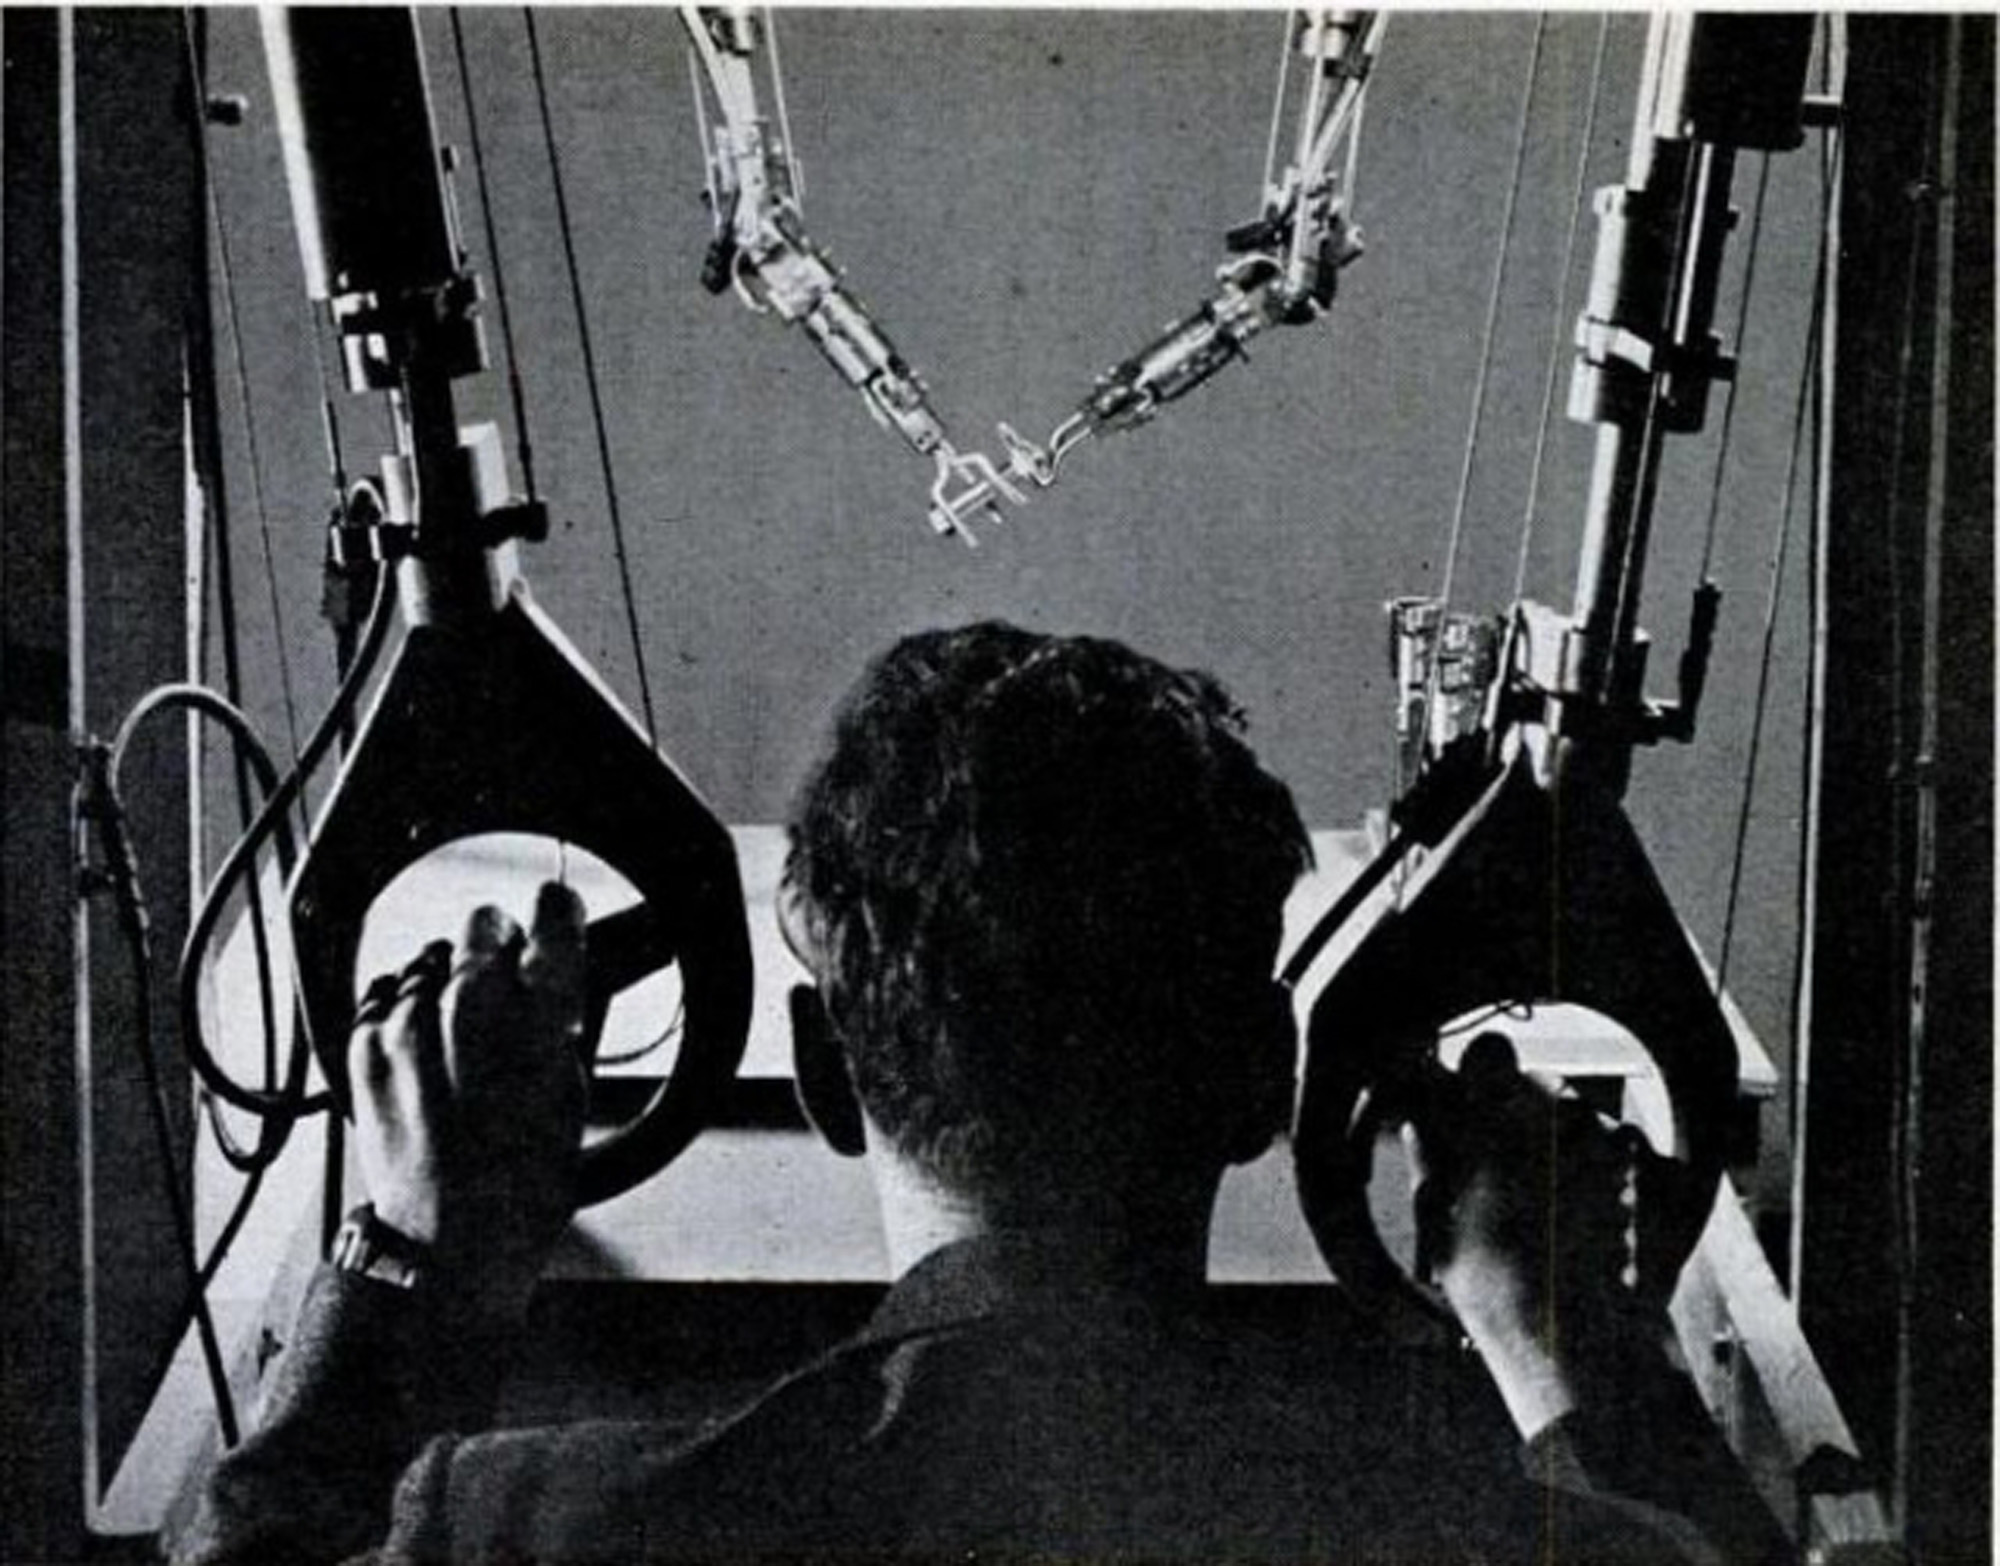 An operator using the GE Master-Slave Manipulator, which appears as two robotic puppet controls